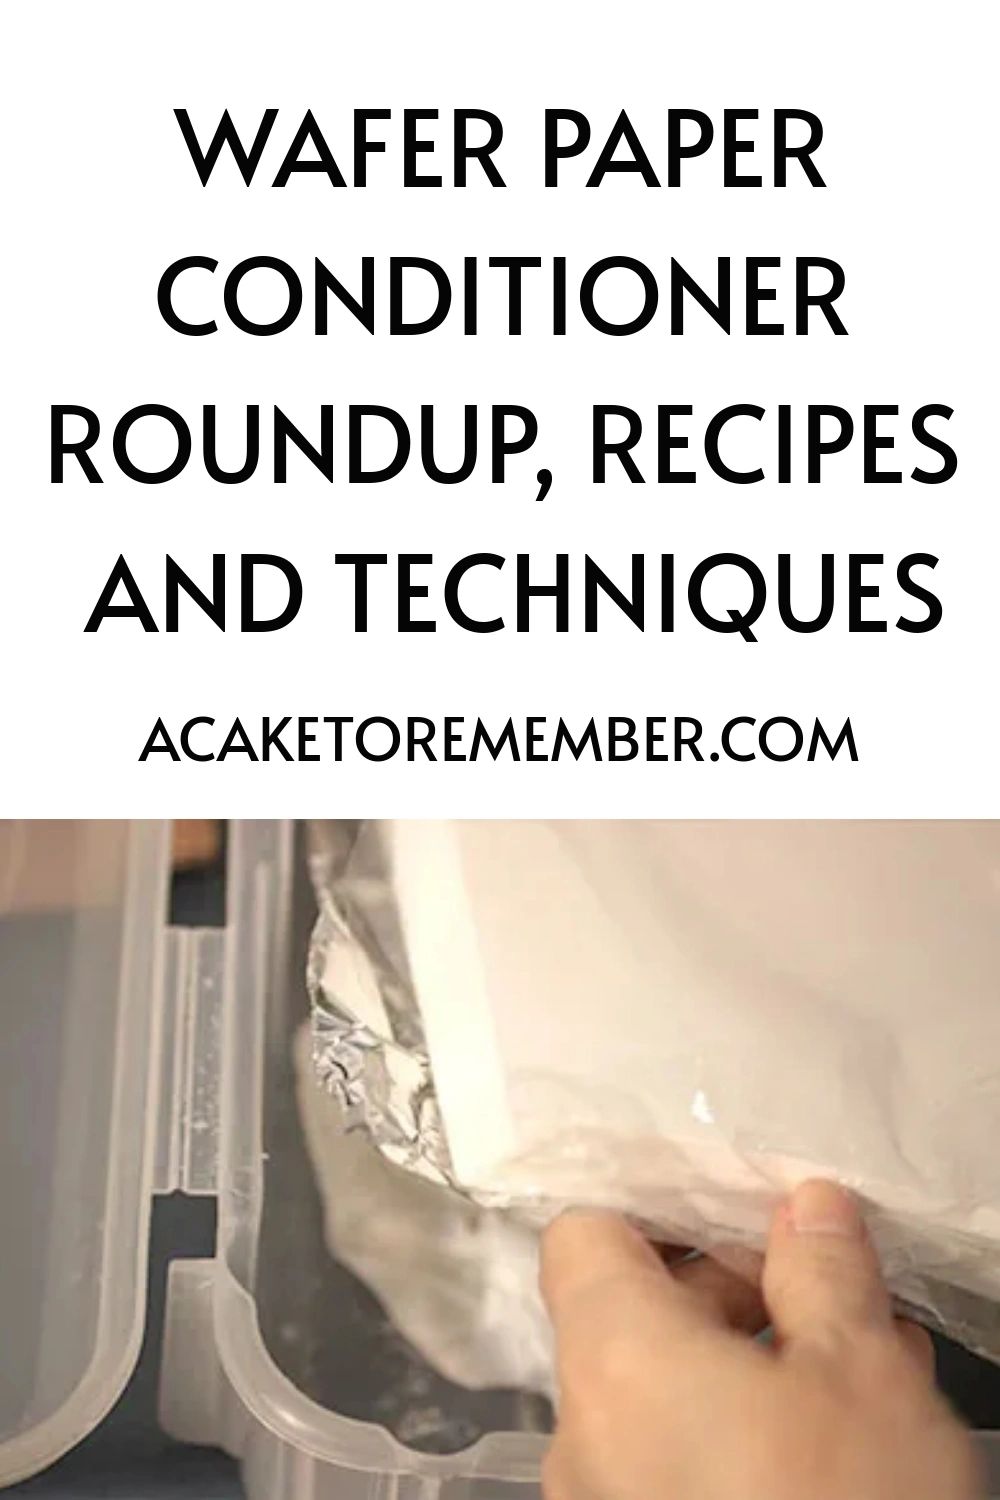 Wafer Paper Conditioner Roundup, Recipes and Techniques